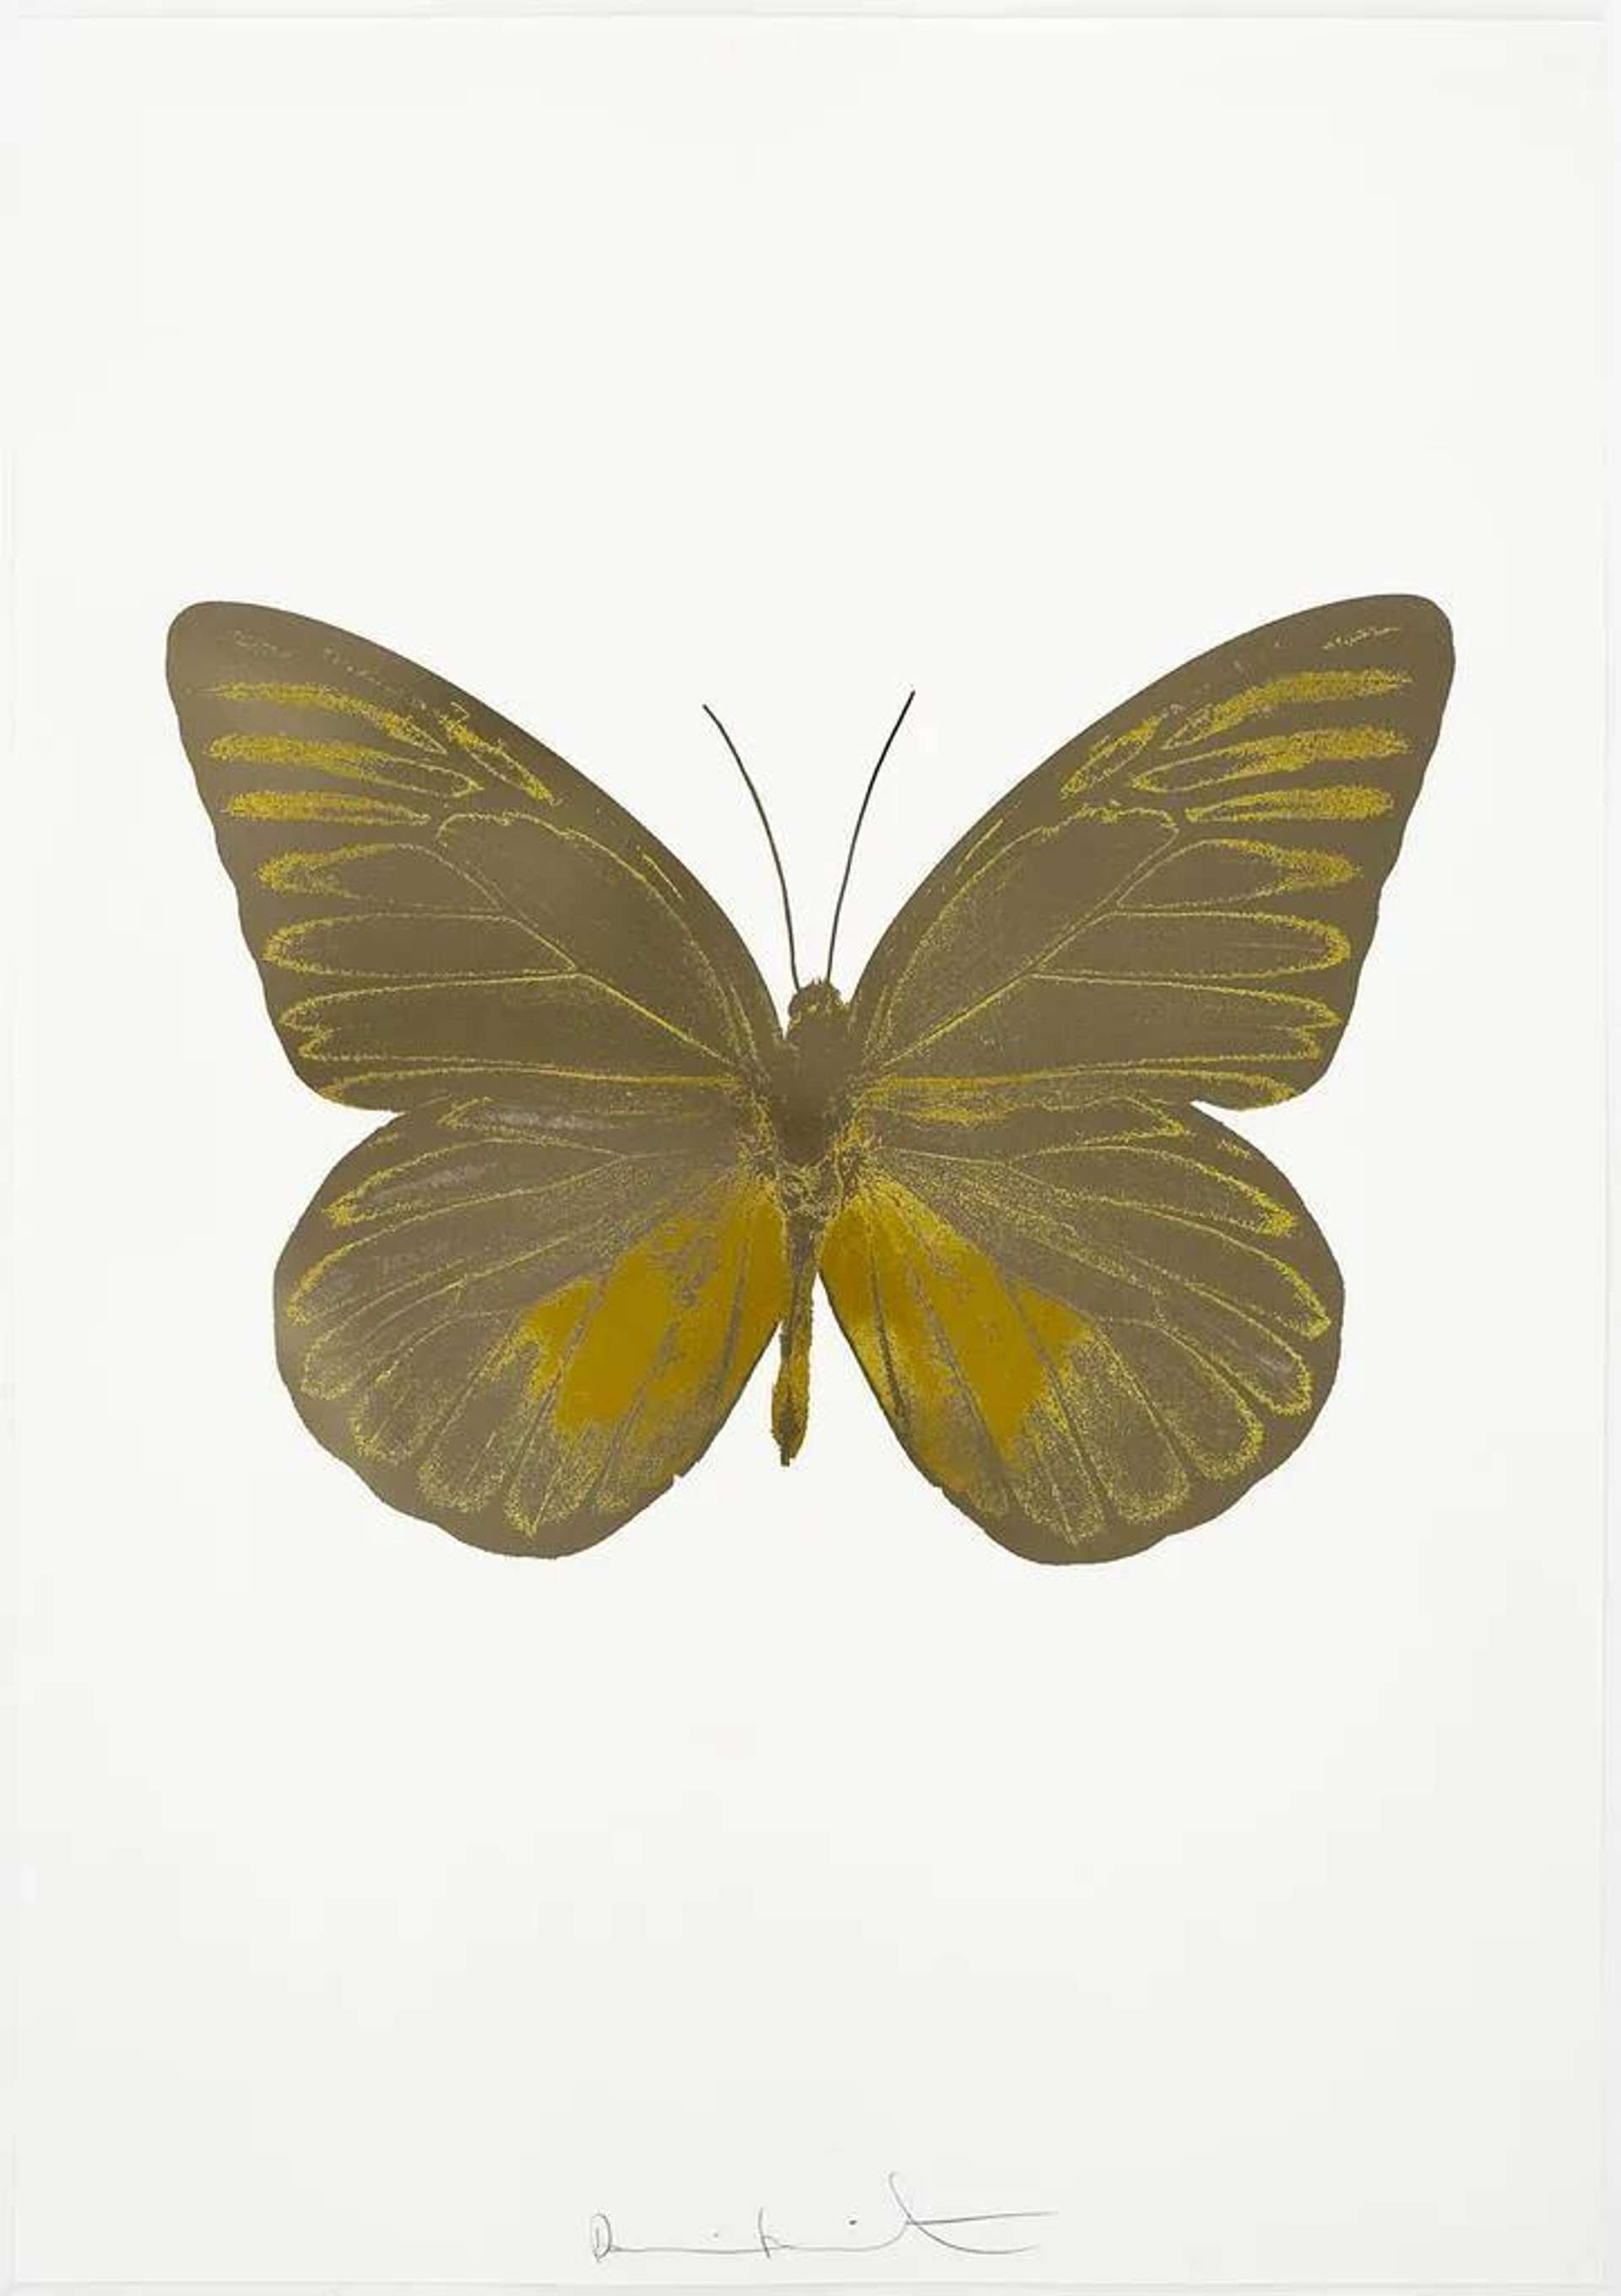 Damien Hirst: The Souls I (smoke, oriental gold) - Signed Print